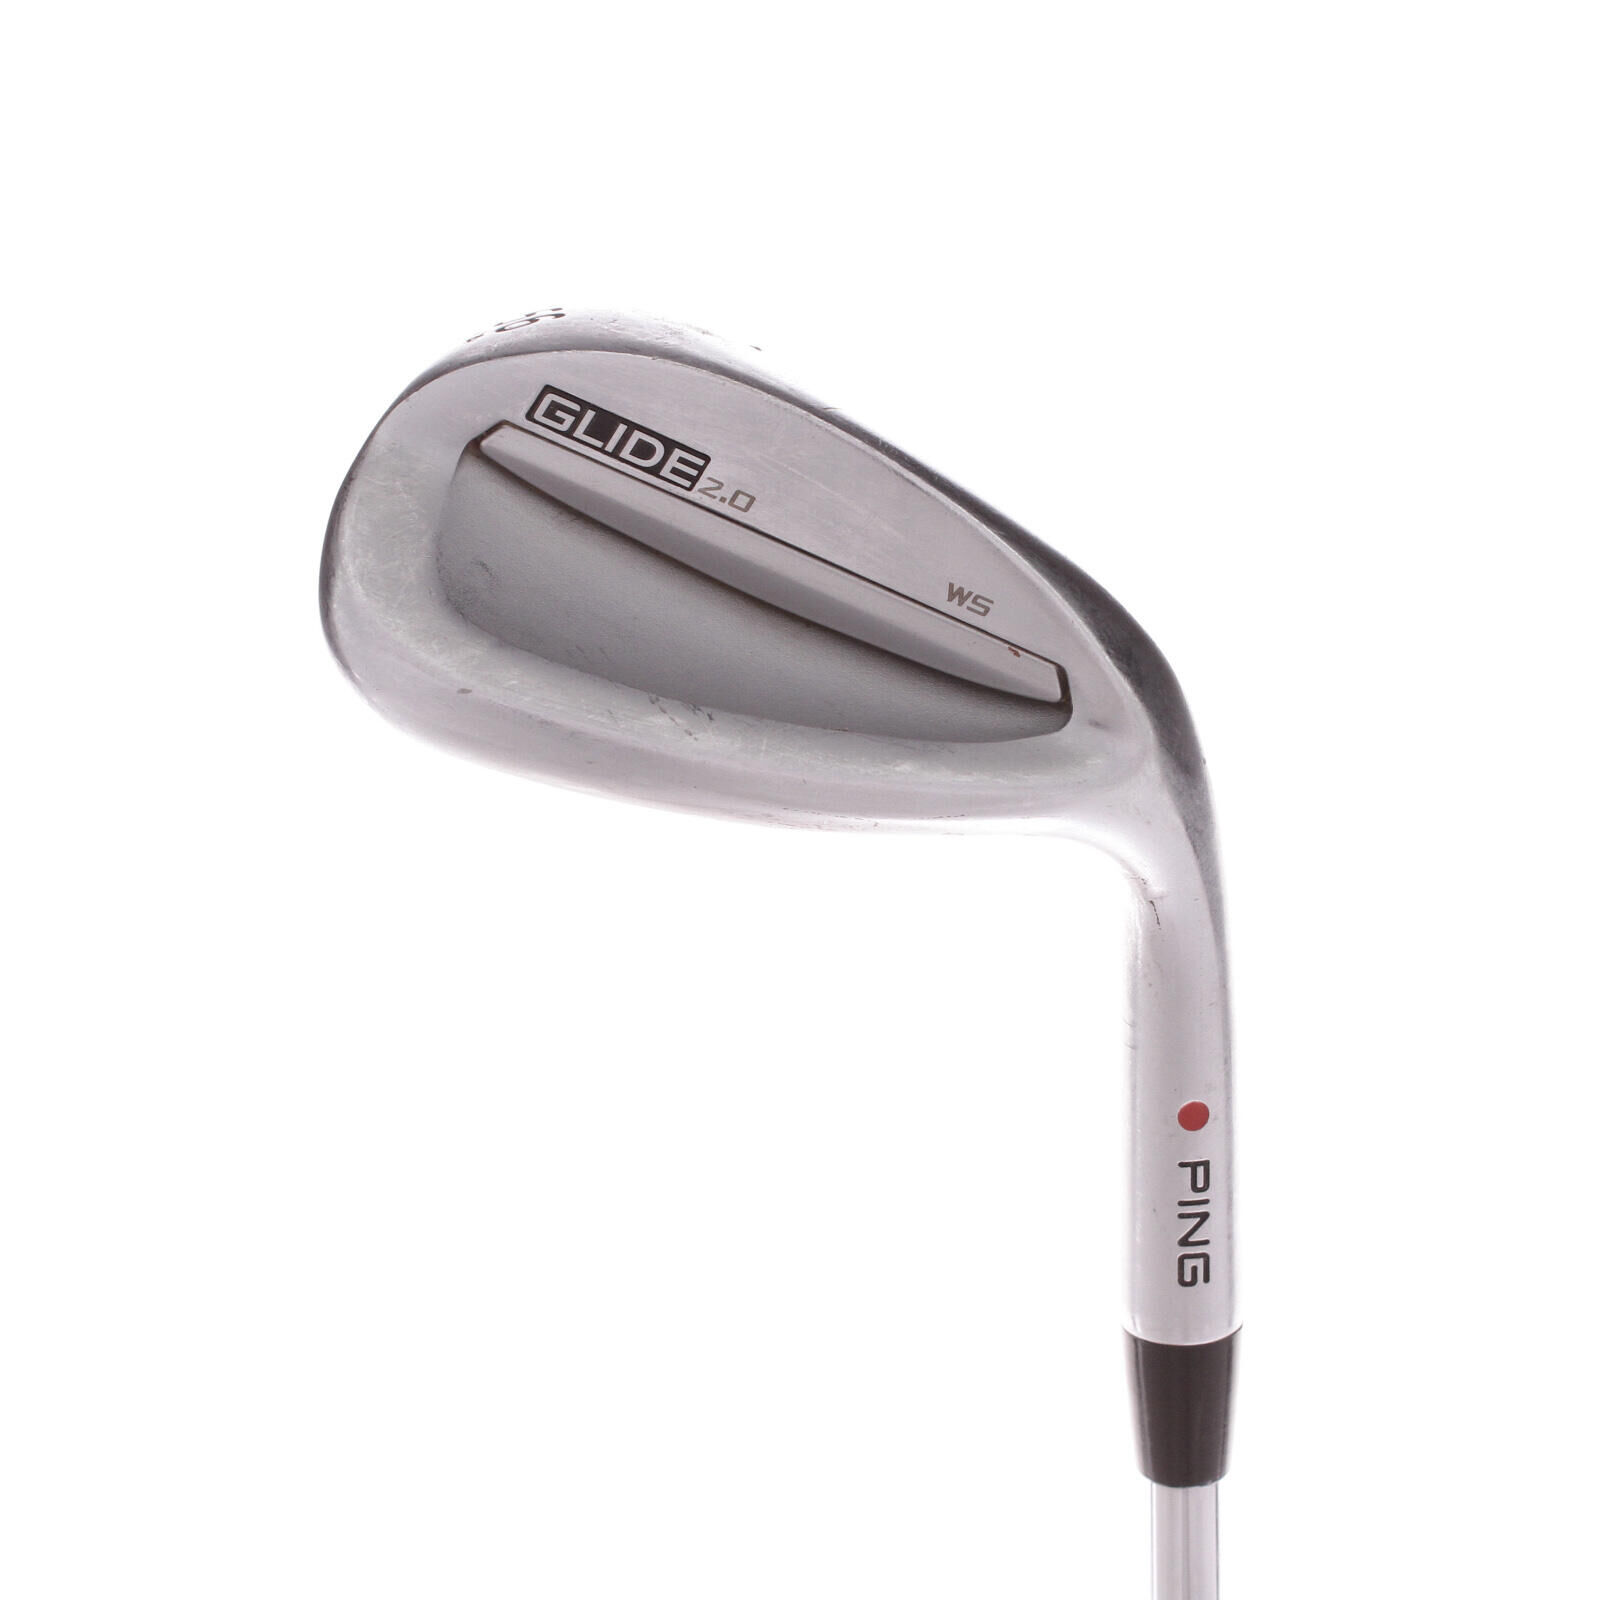 PING USED - Sand Wedge Ping Glide 2.0 WS 56* Extra Stiff Flex Right Handed - GRADE C